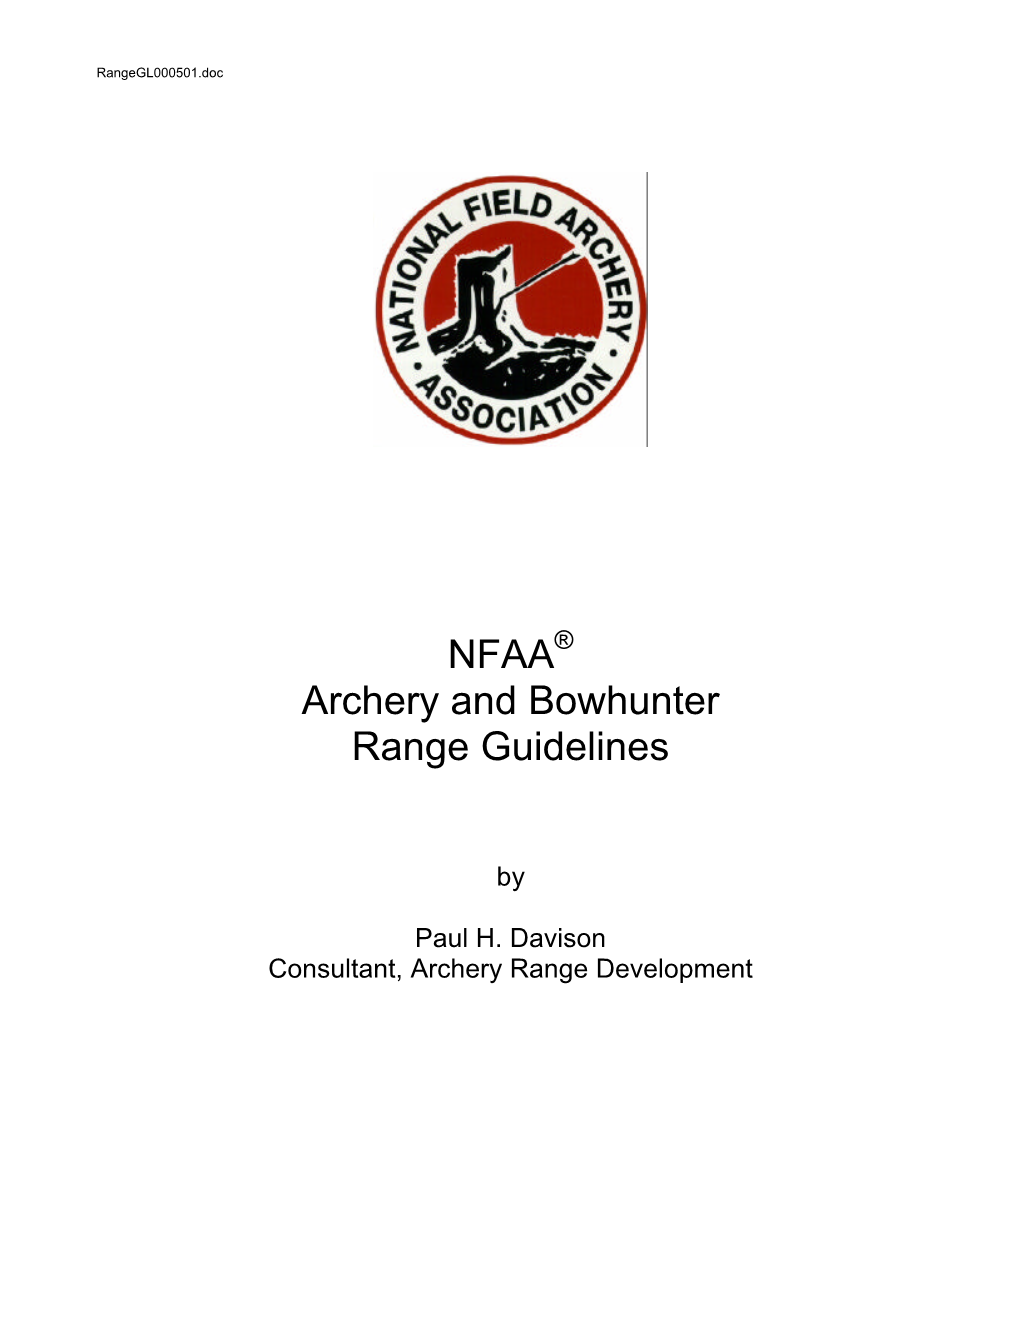 NFAA Archery and Bowhunter Range Guidelines